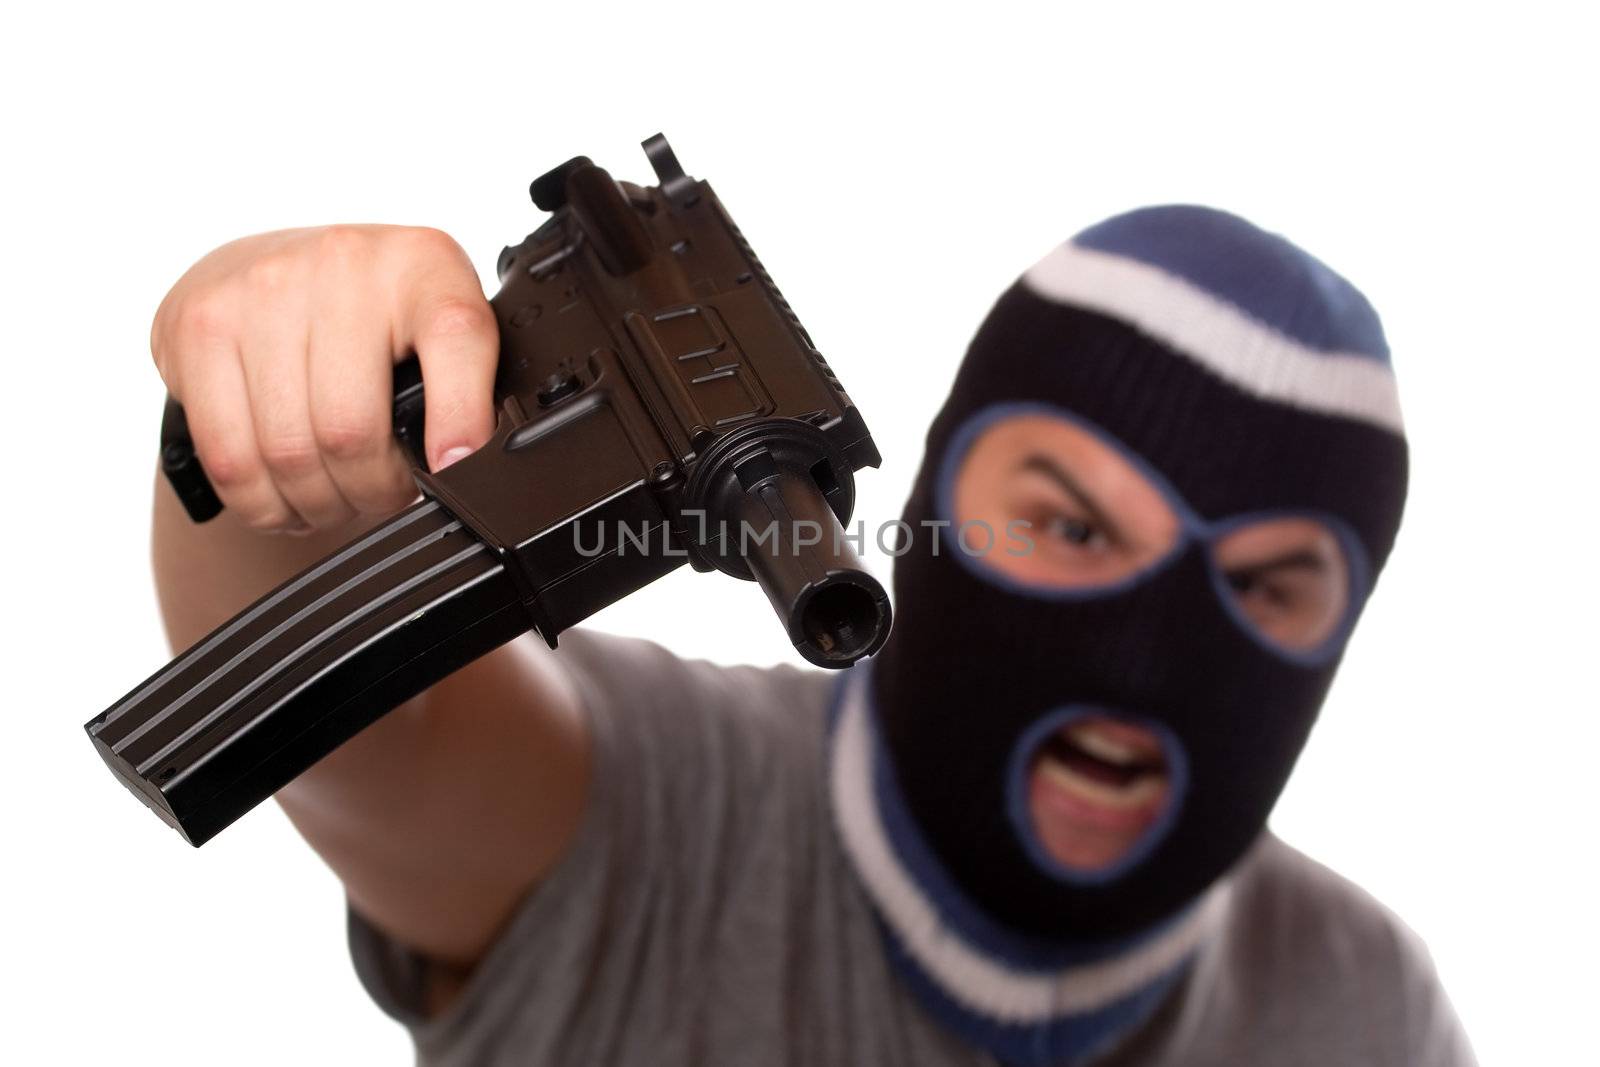 An angry looking man wearing a ski mask pointis a black automatic machine gun at the viewer. Shallow depth of field with sharpest focus on the gun.